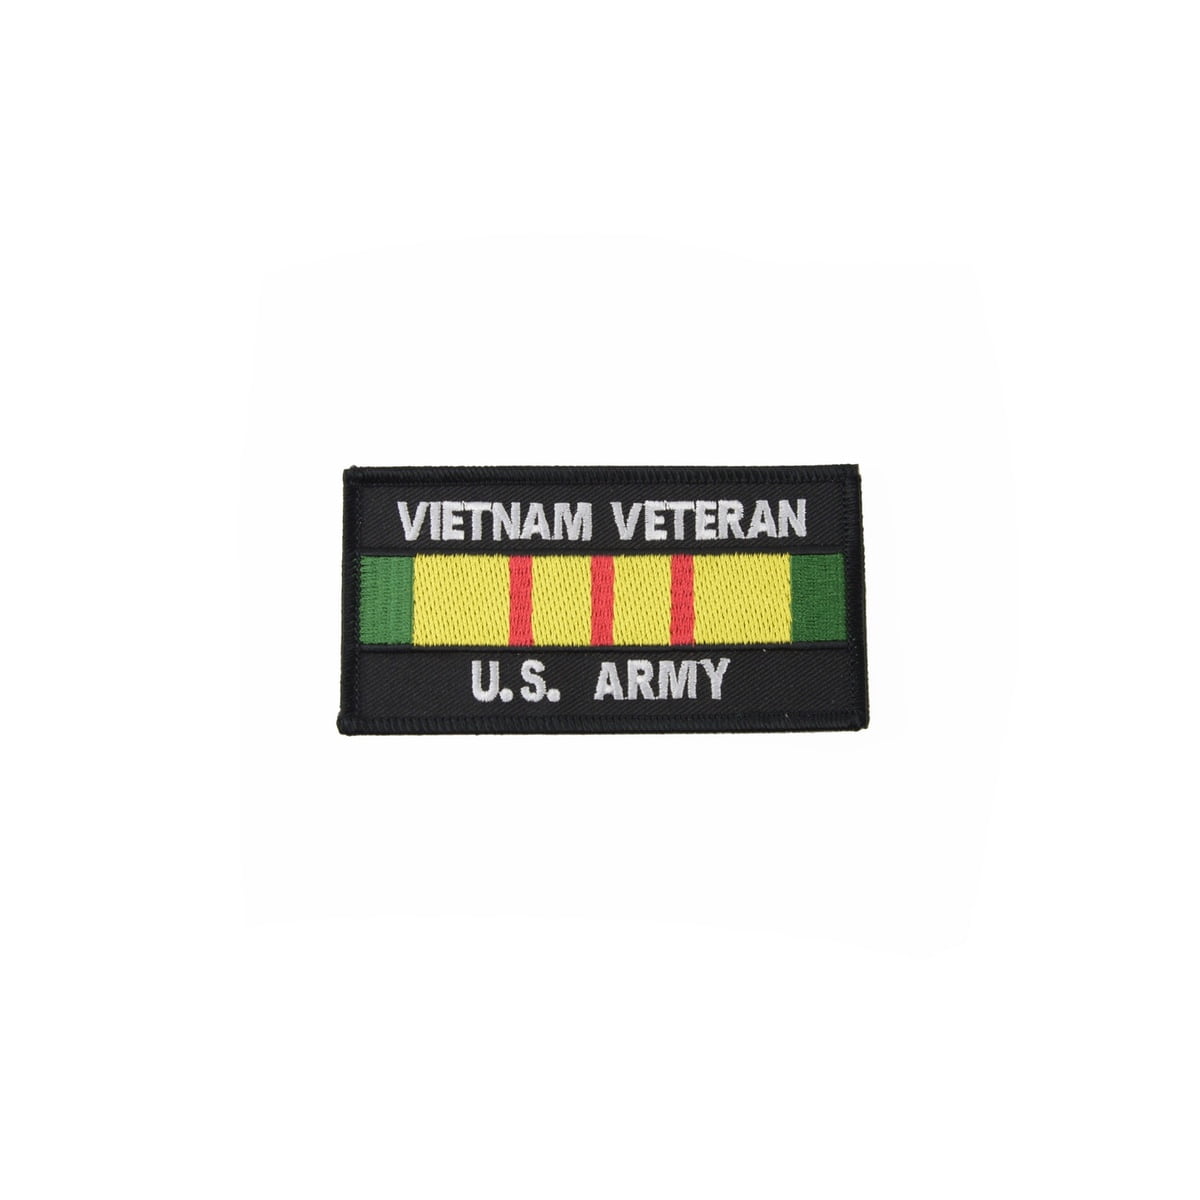 Vietnam t shirts army clothing veteran patch military uniforms collectibles